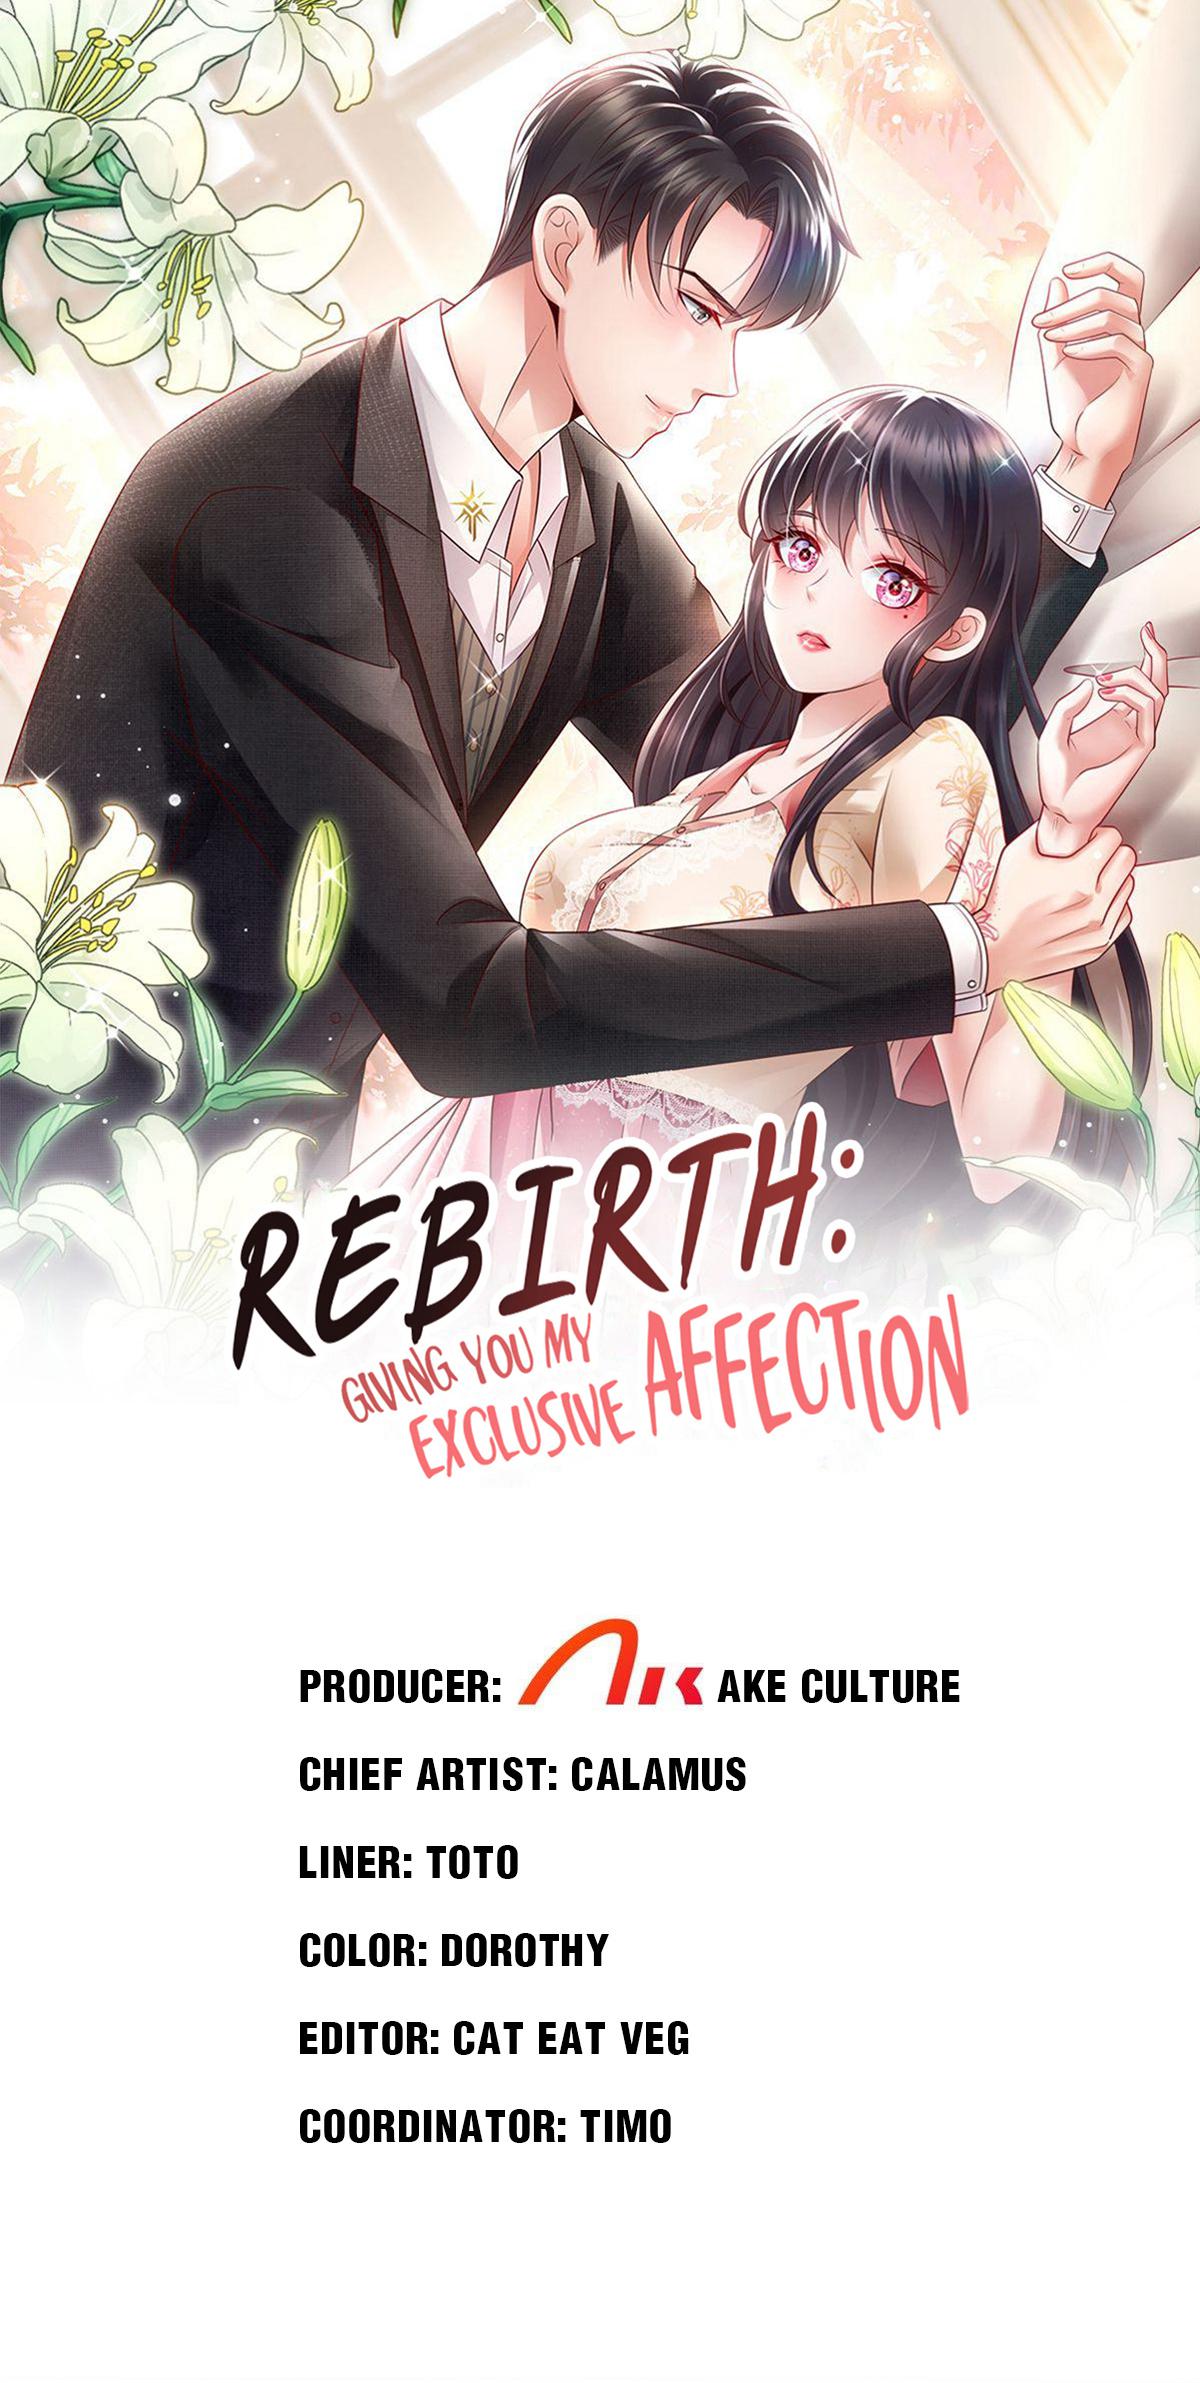 Rebirth: Giving You My Exclusive Affection 227